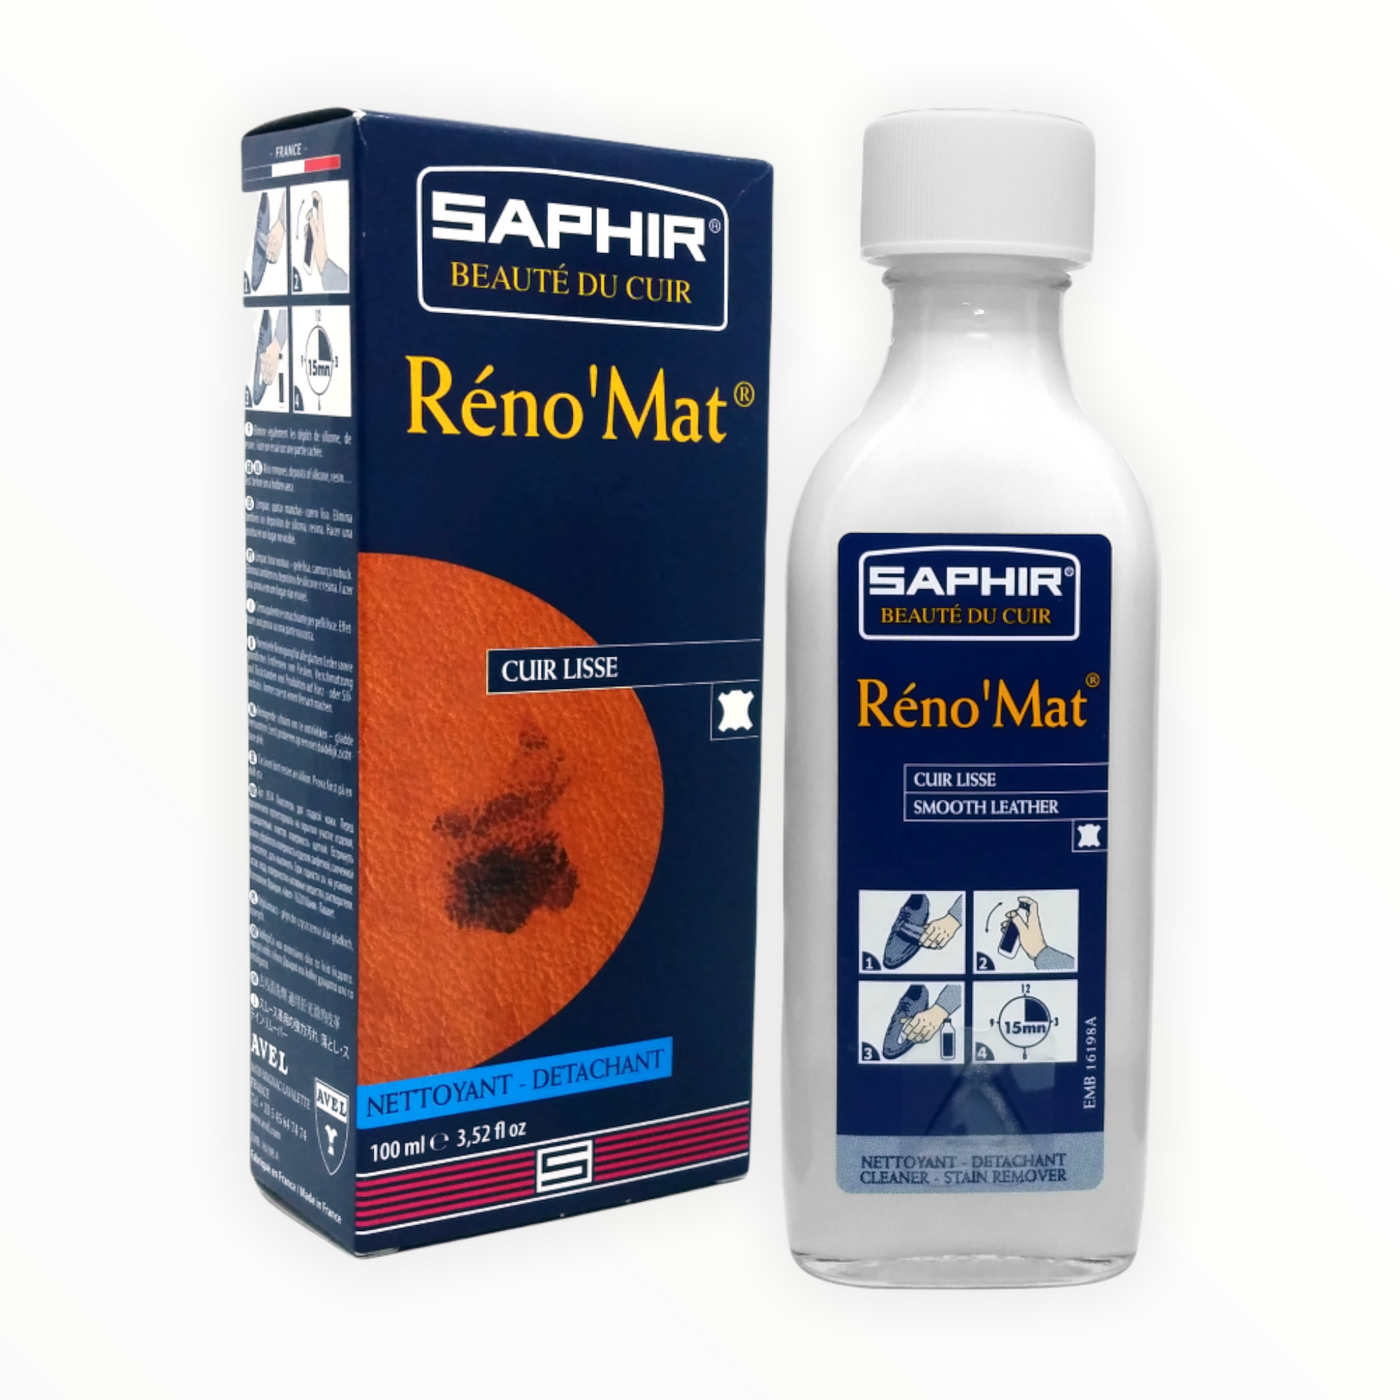 Saphir RenoMat Cleaner and Stain Remover